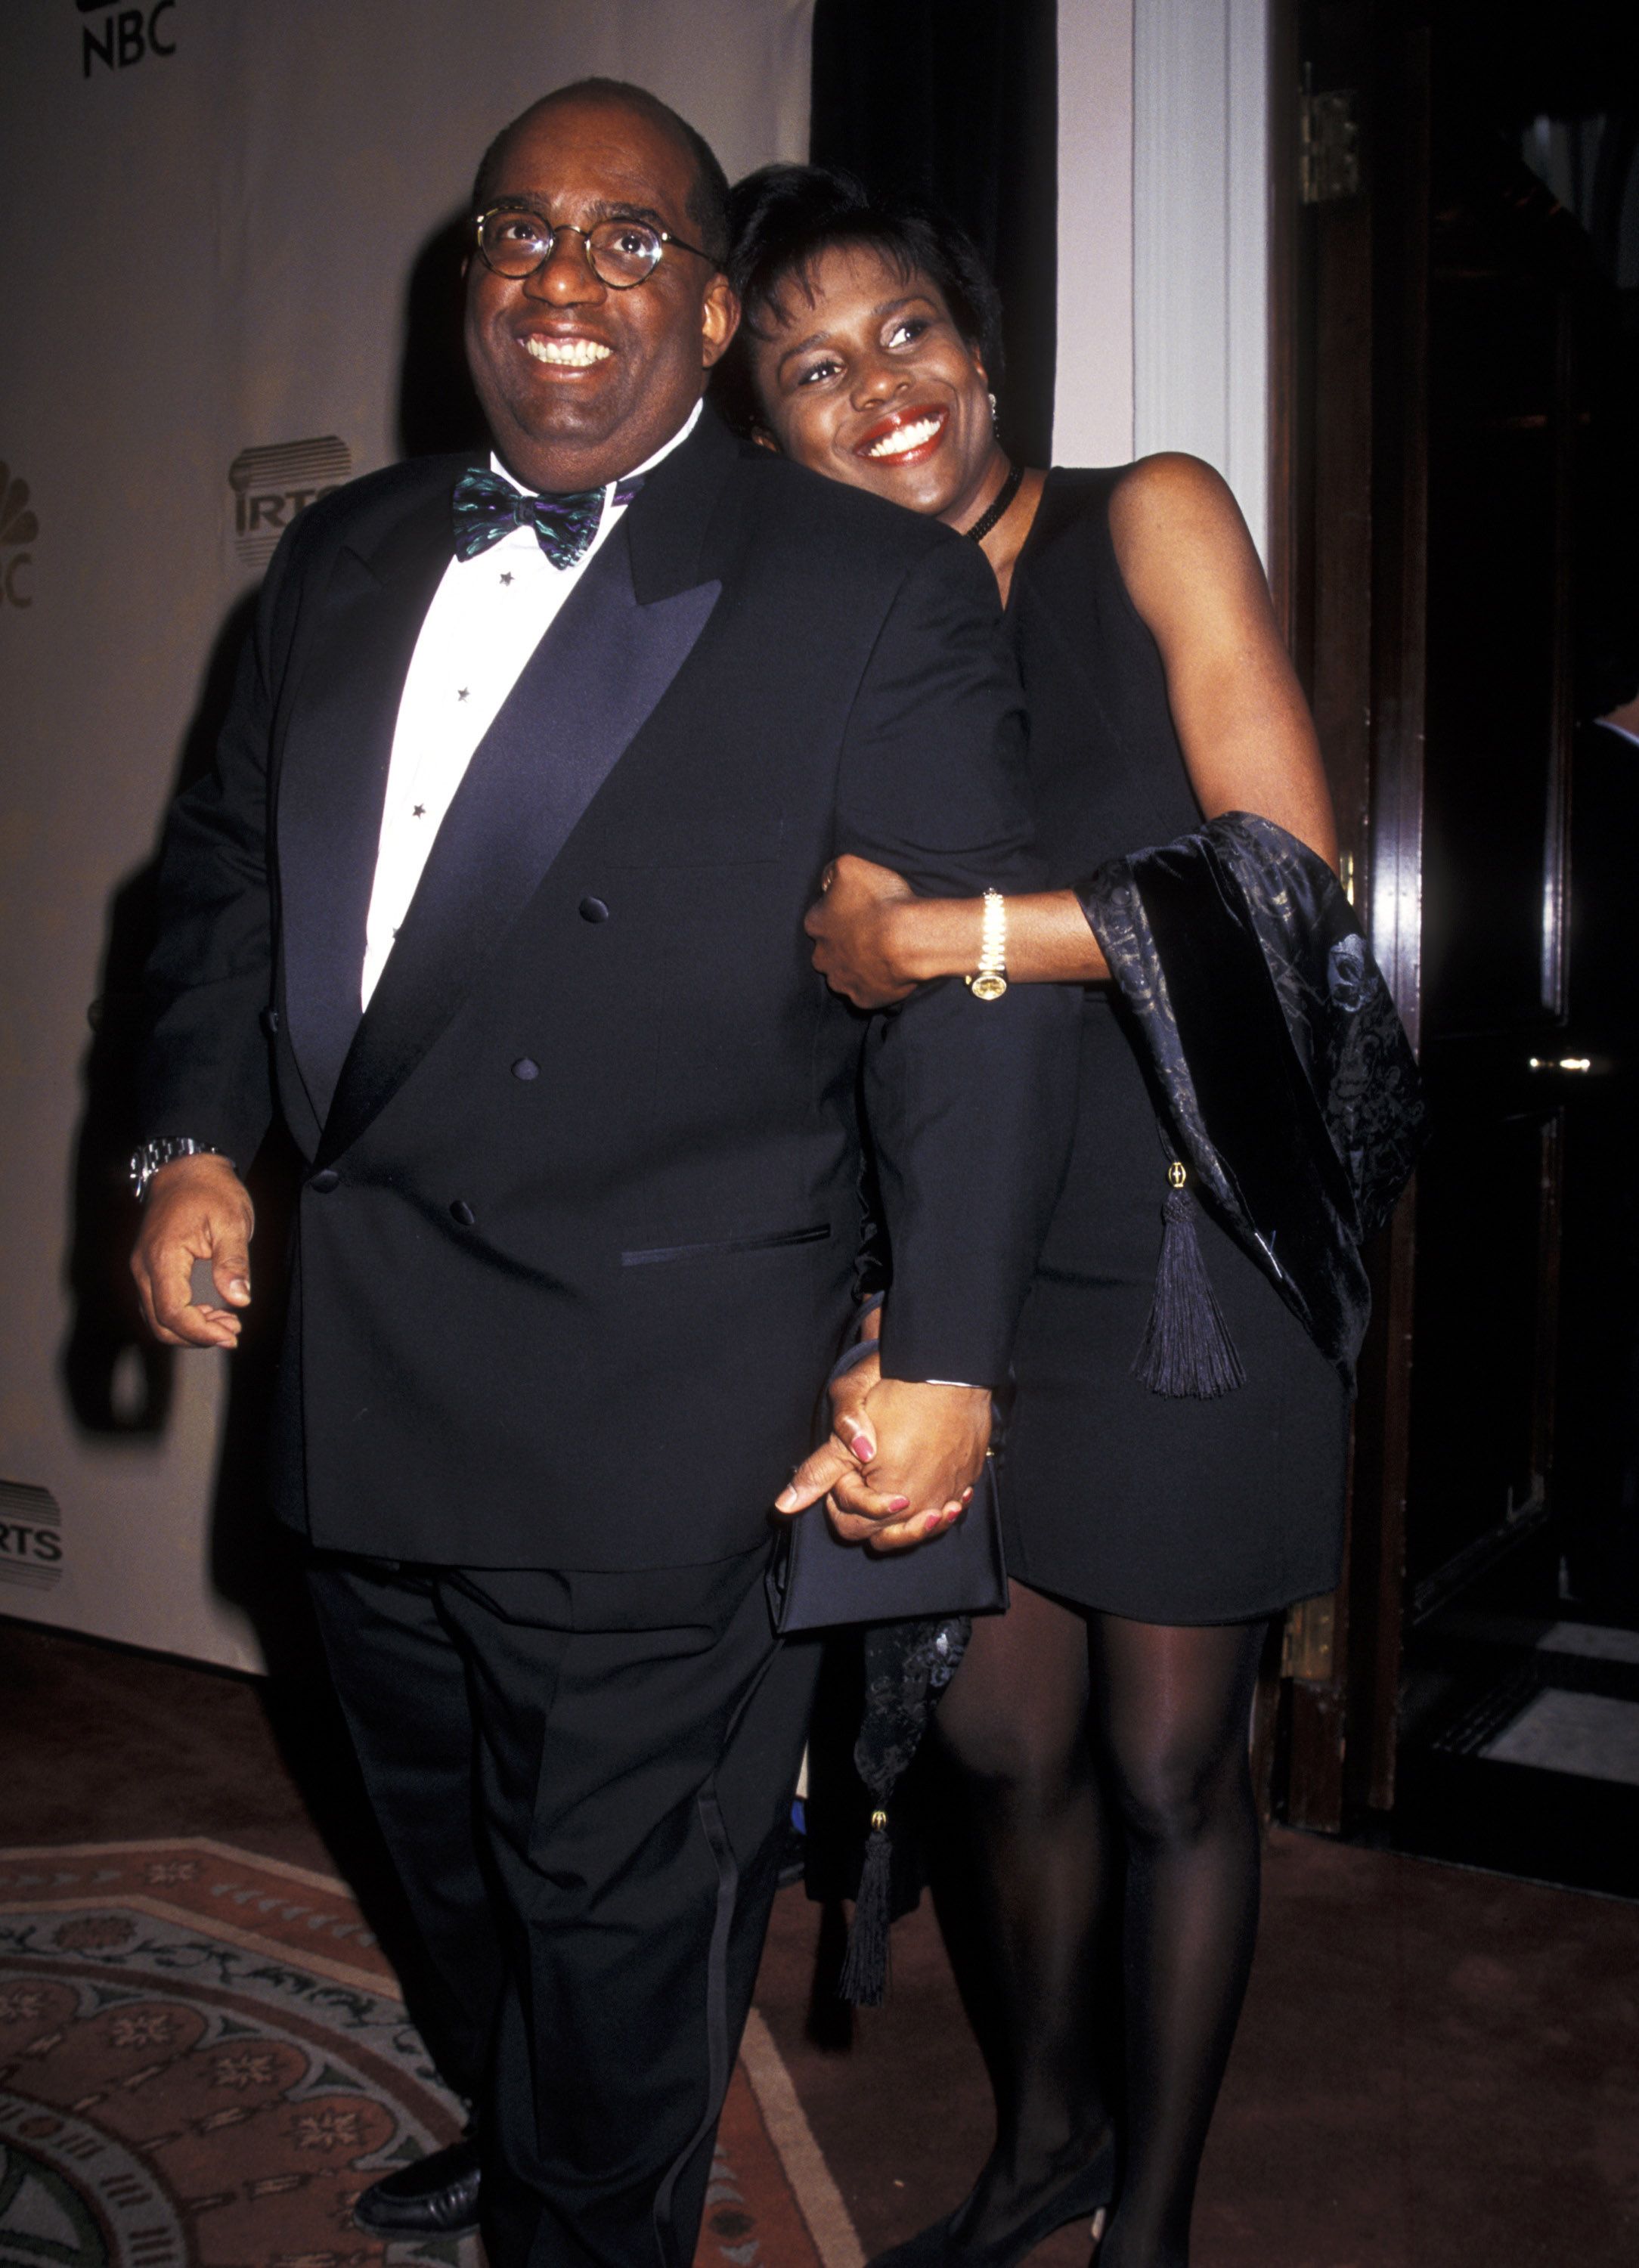 Al Roker and Deborah Roberts at the IRTS Foundation Gold Medal Award Honors Robert Wright in New York City, on February 26, 1997. | Source: Ron Galella/Ron Galella Collection/Getty Images